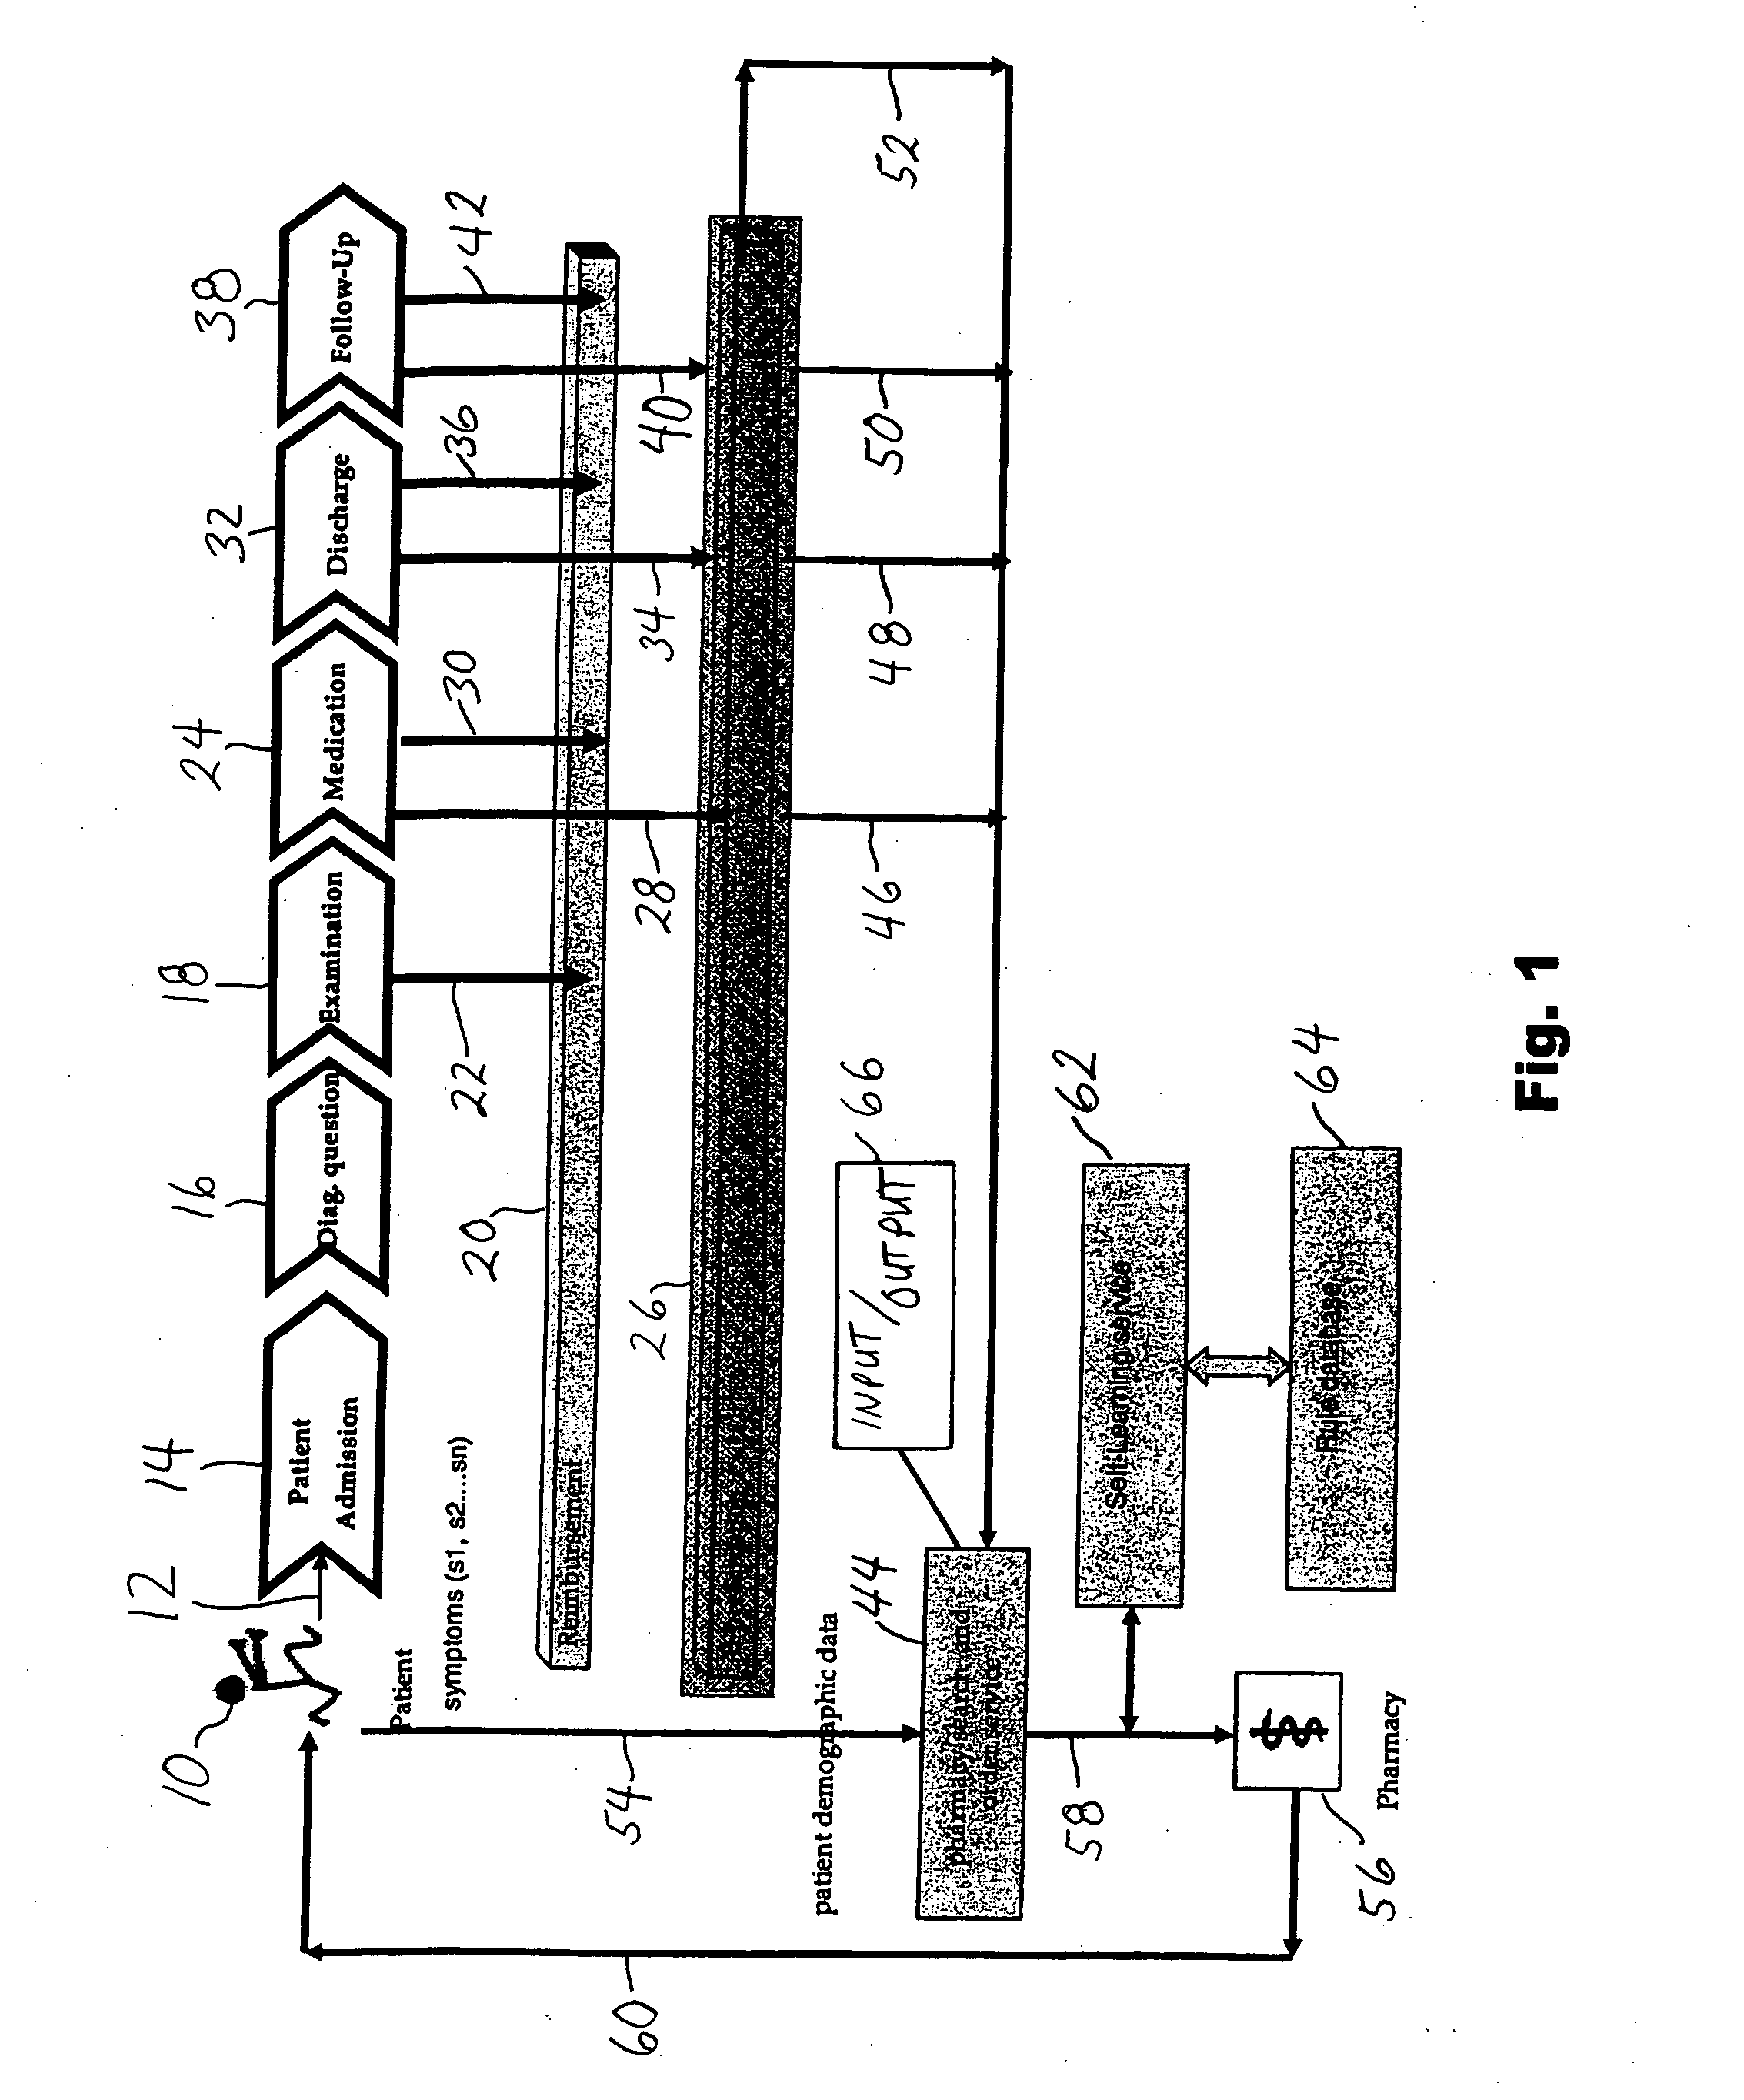 Method and apparatus for pharmacy inventory management and trend detection